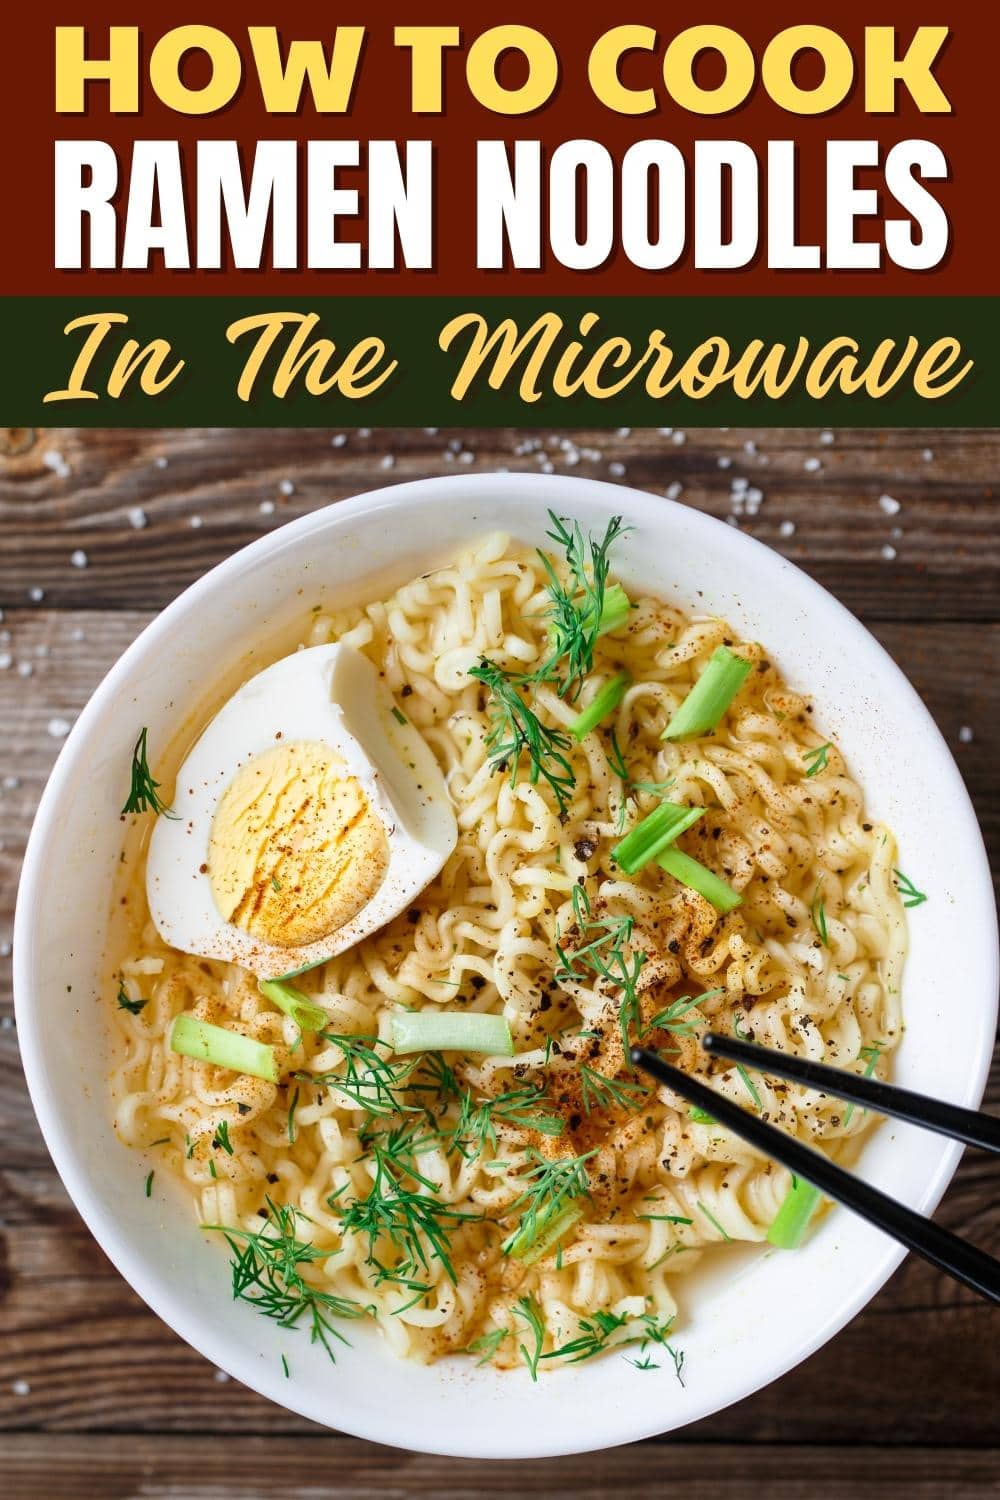 How to Cook Ramen Noodles in the Microwave